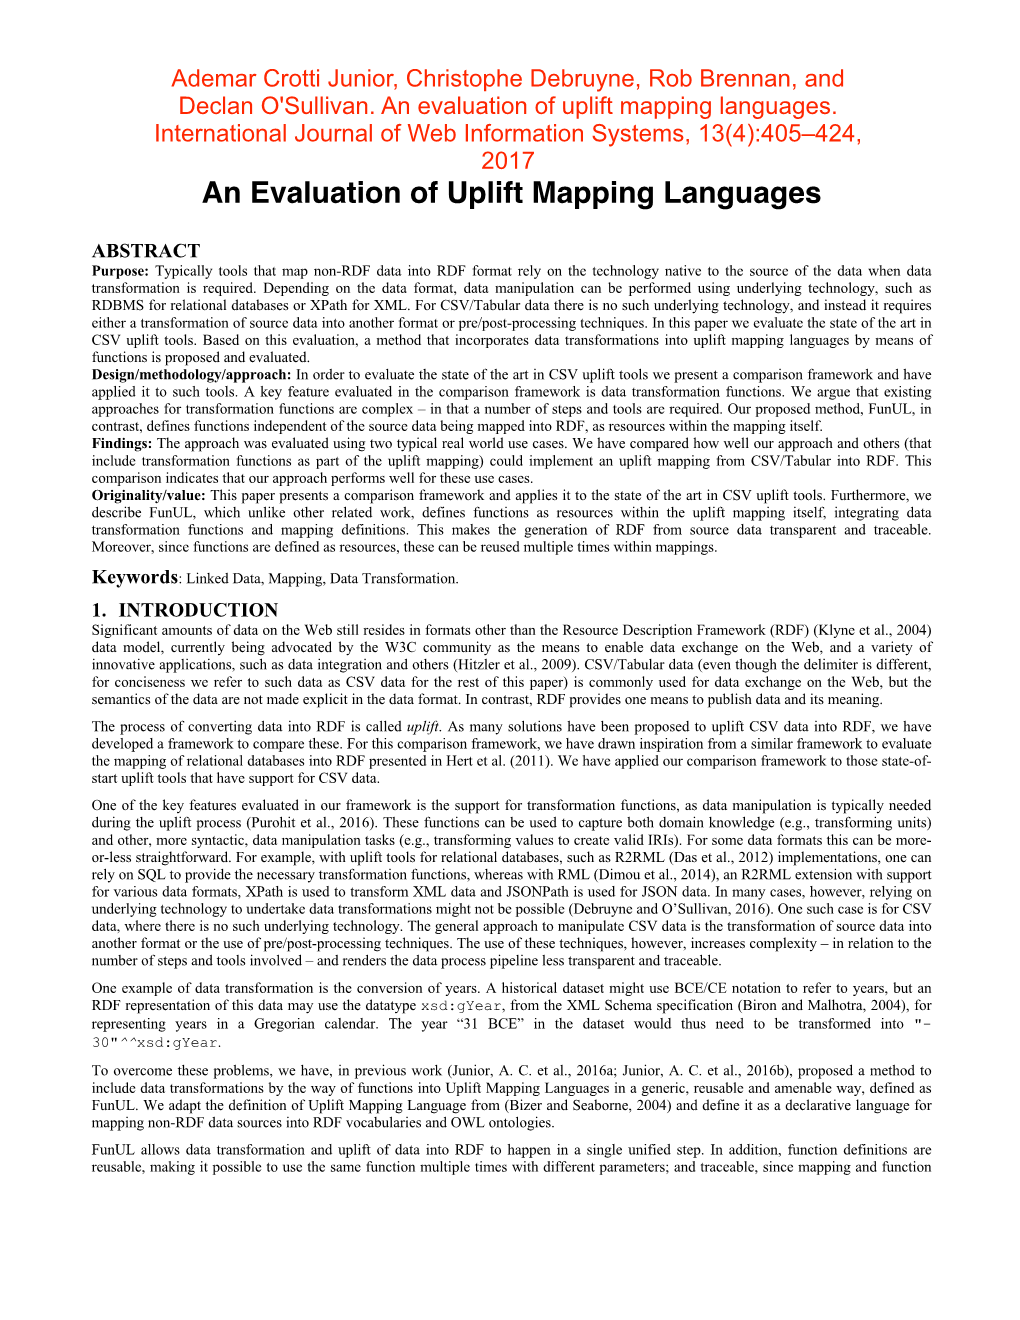 An Evaluation of Uplift Mapping Languages